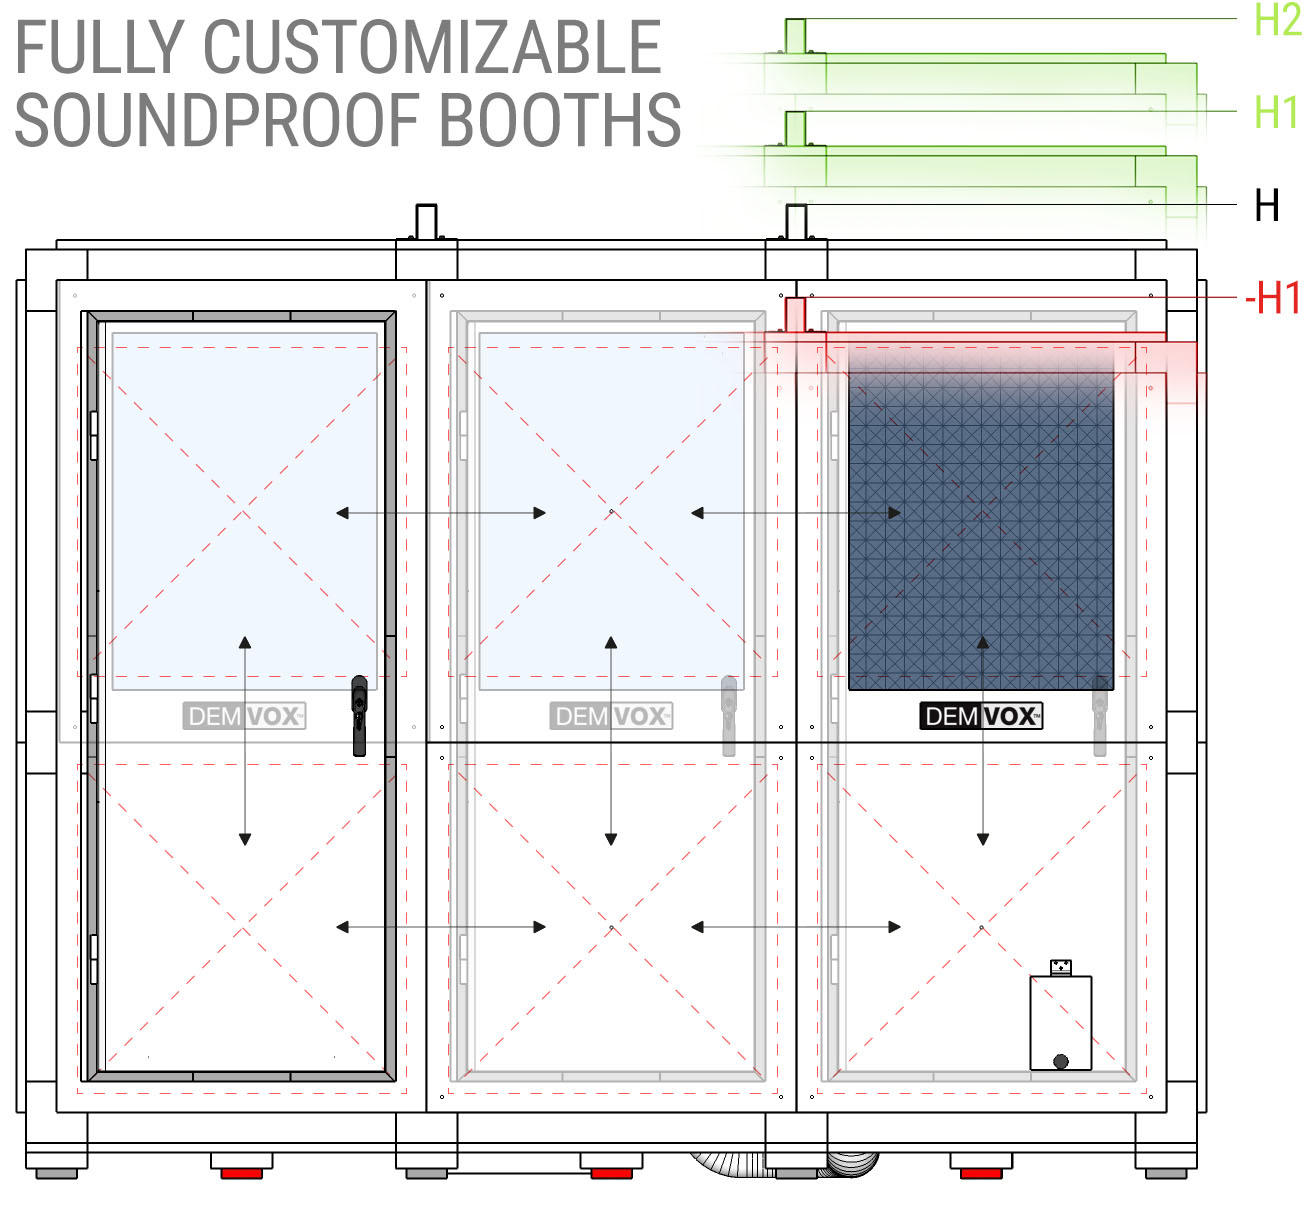 fully customizable soundproof booths